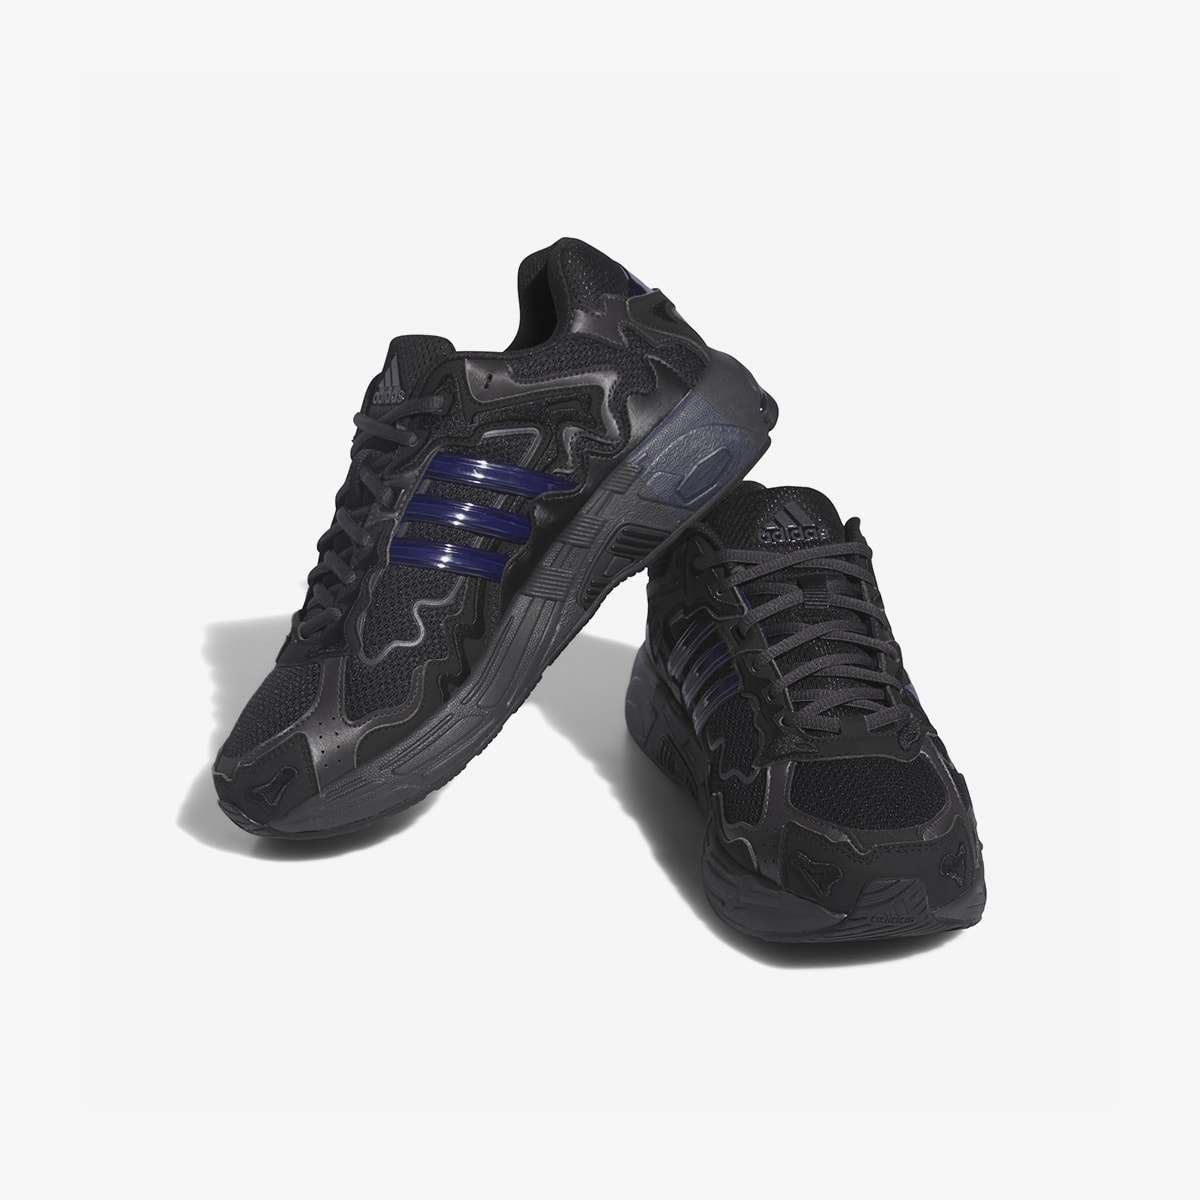 Adidas x Bad Bunny Response CL (Black & Ink) | END. Launches